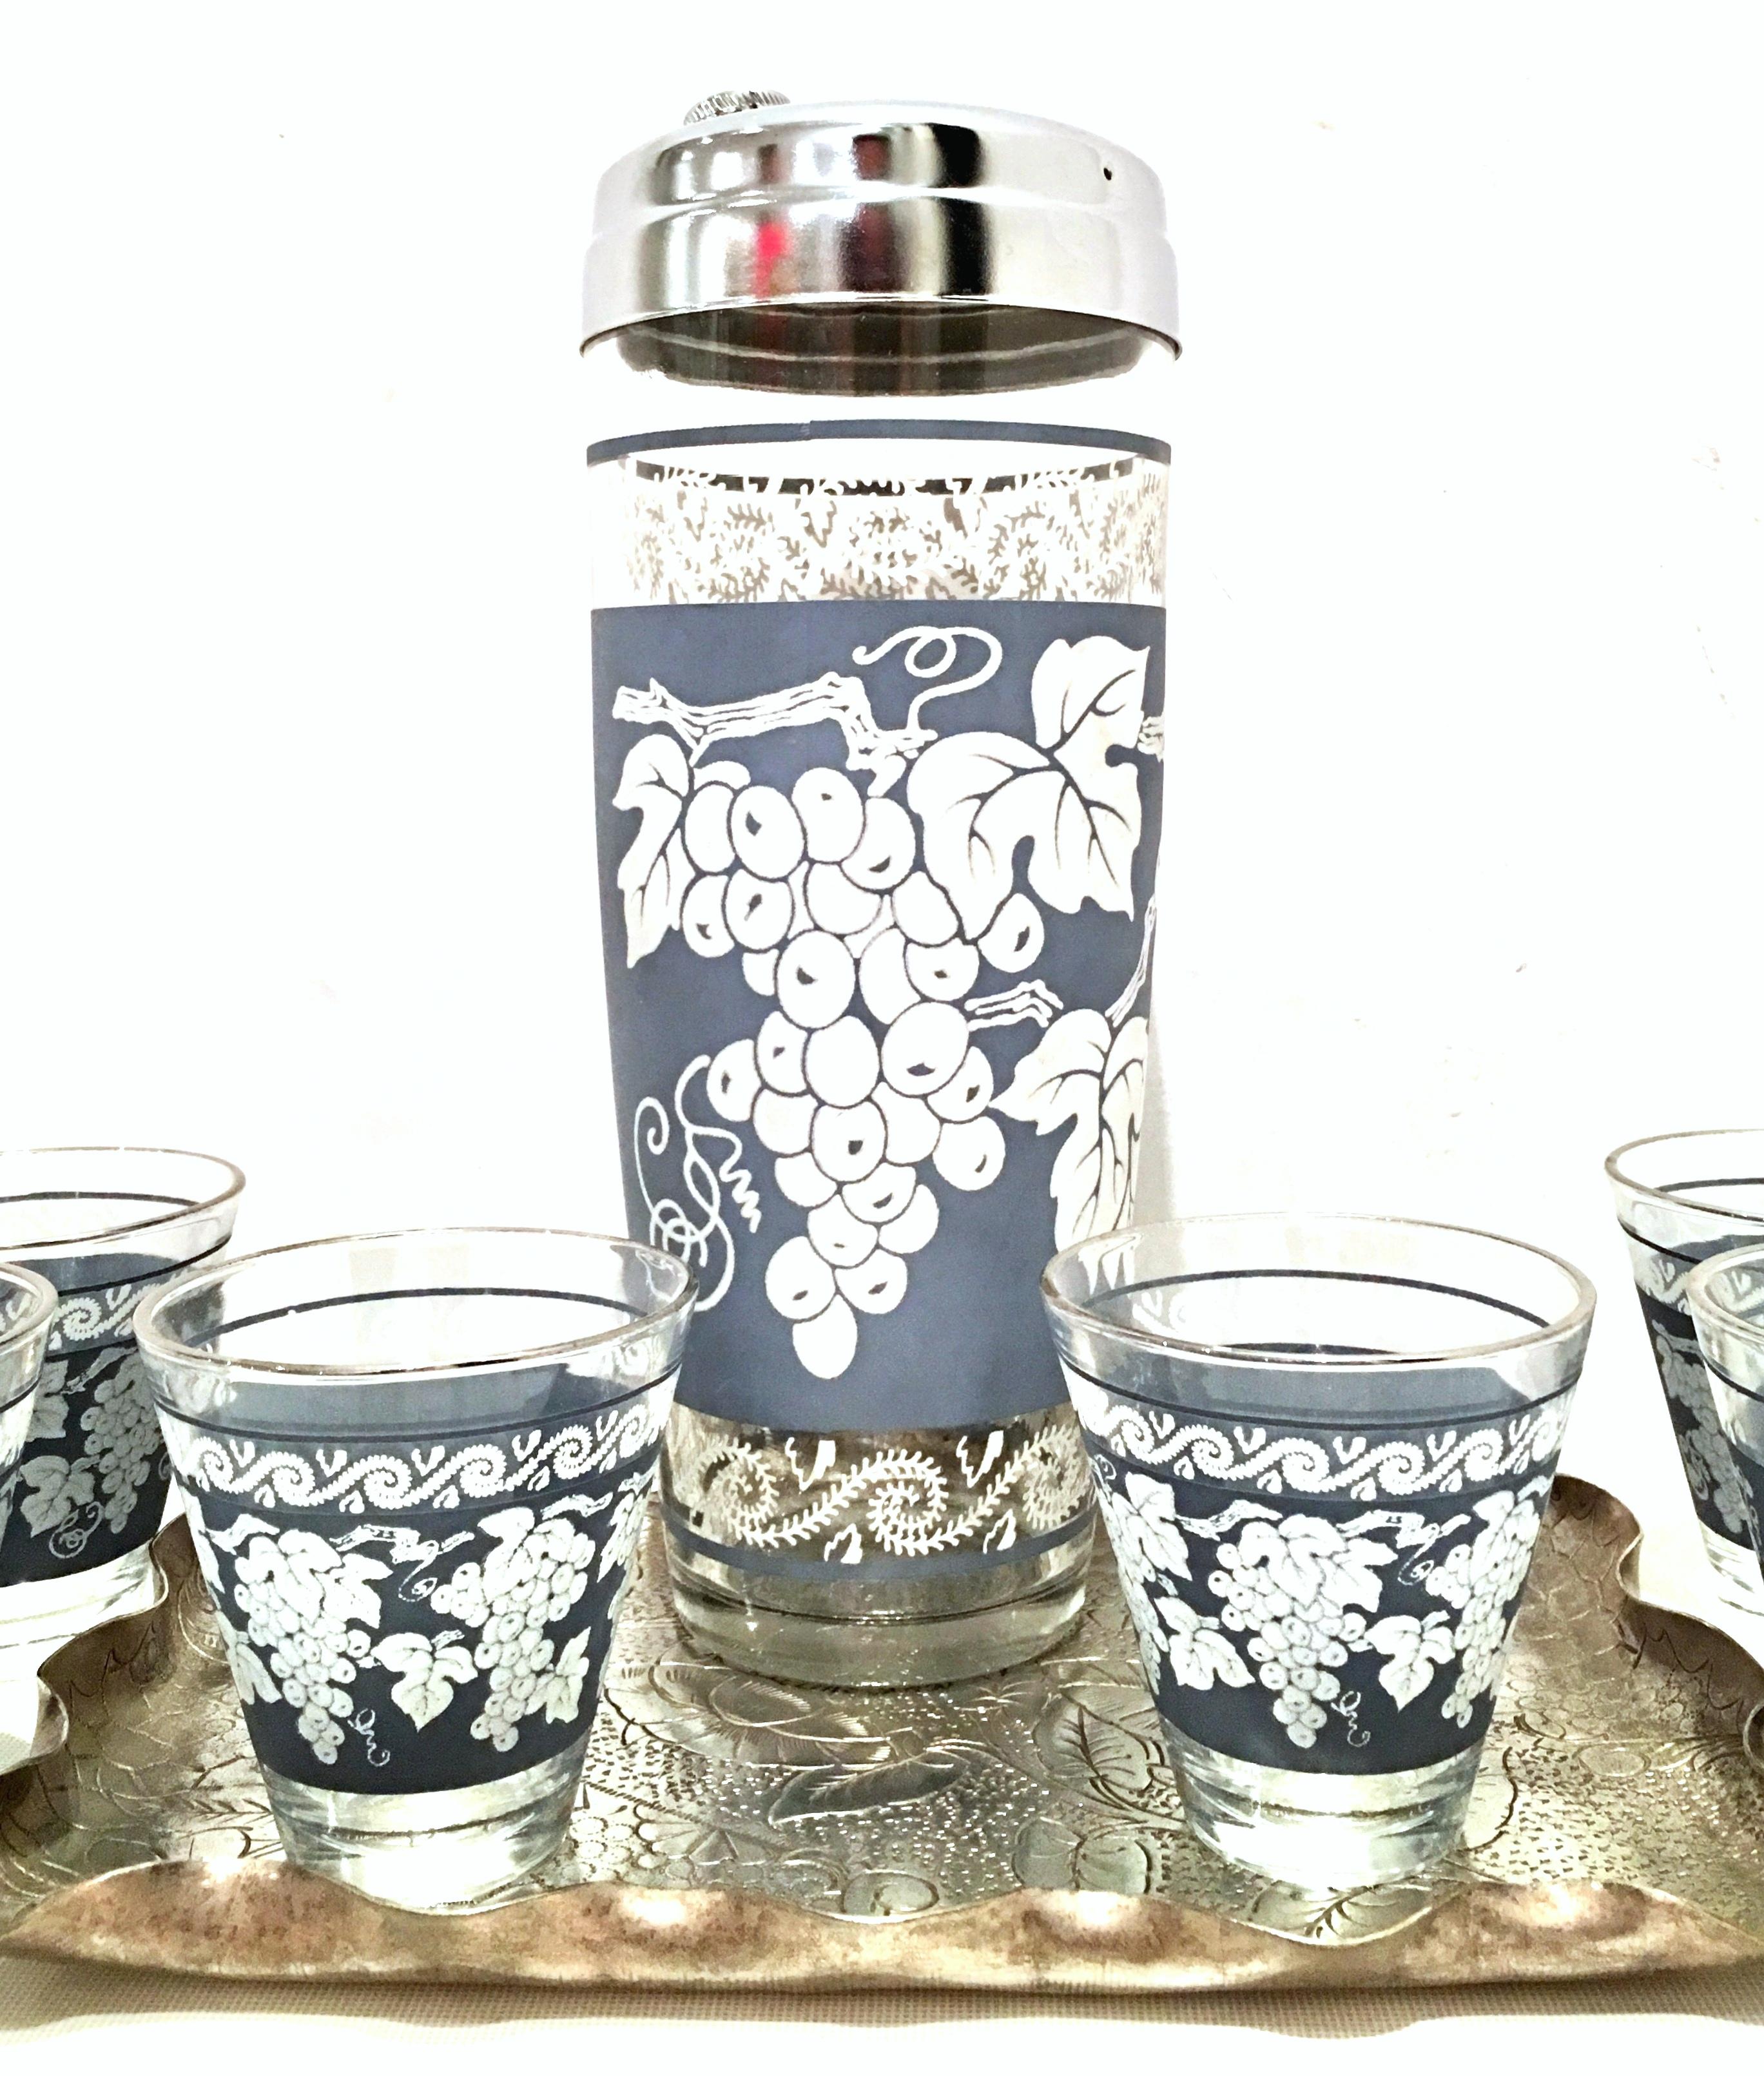 Mid-20th century American blown glass and platinum drinks set of eight pieces. Features a Wedgwood blue and white grape vine motif with platinum and silver chrome details. Set includes, one silver plate Art Nouveau etched leaf motif ruffle edge